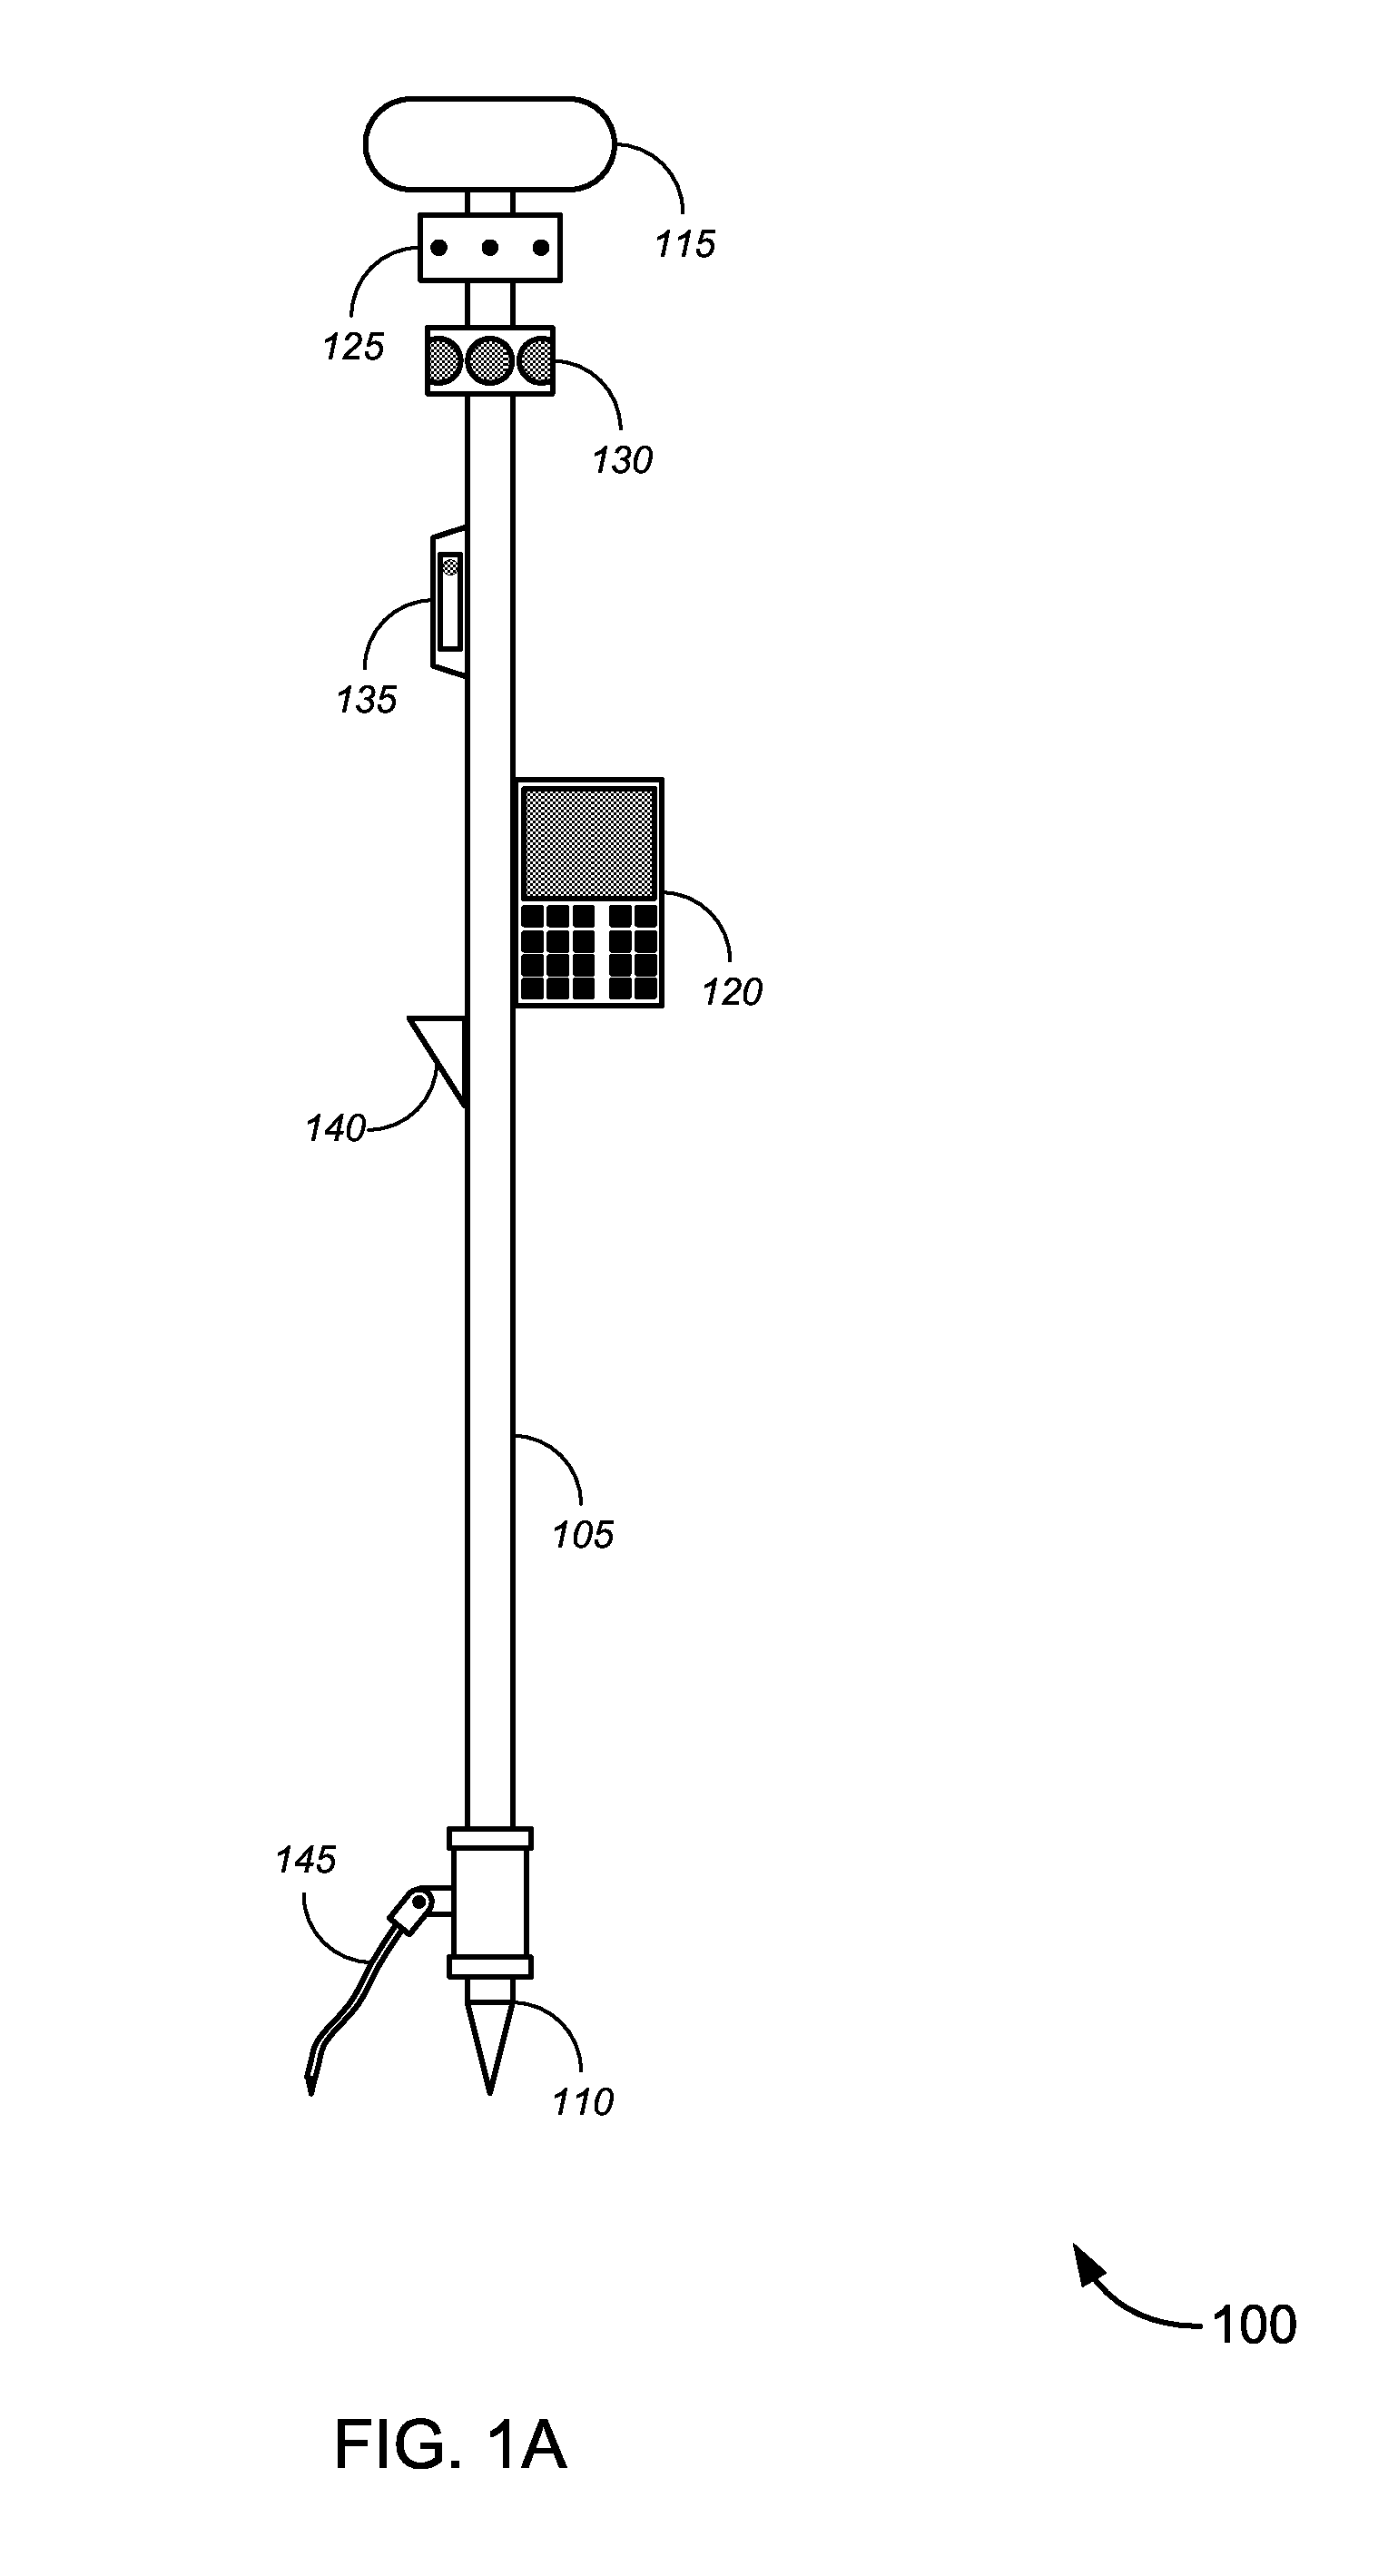 Enhanced Position Measurement Systems and Methods